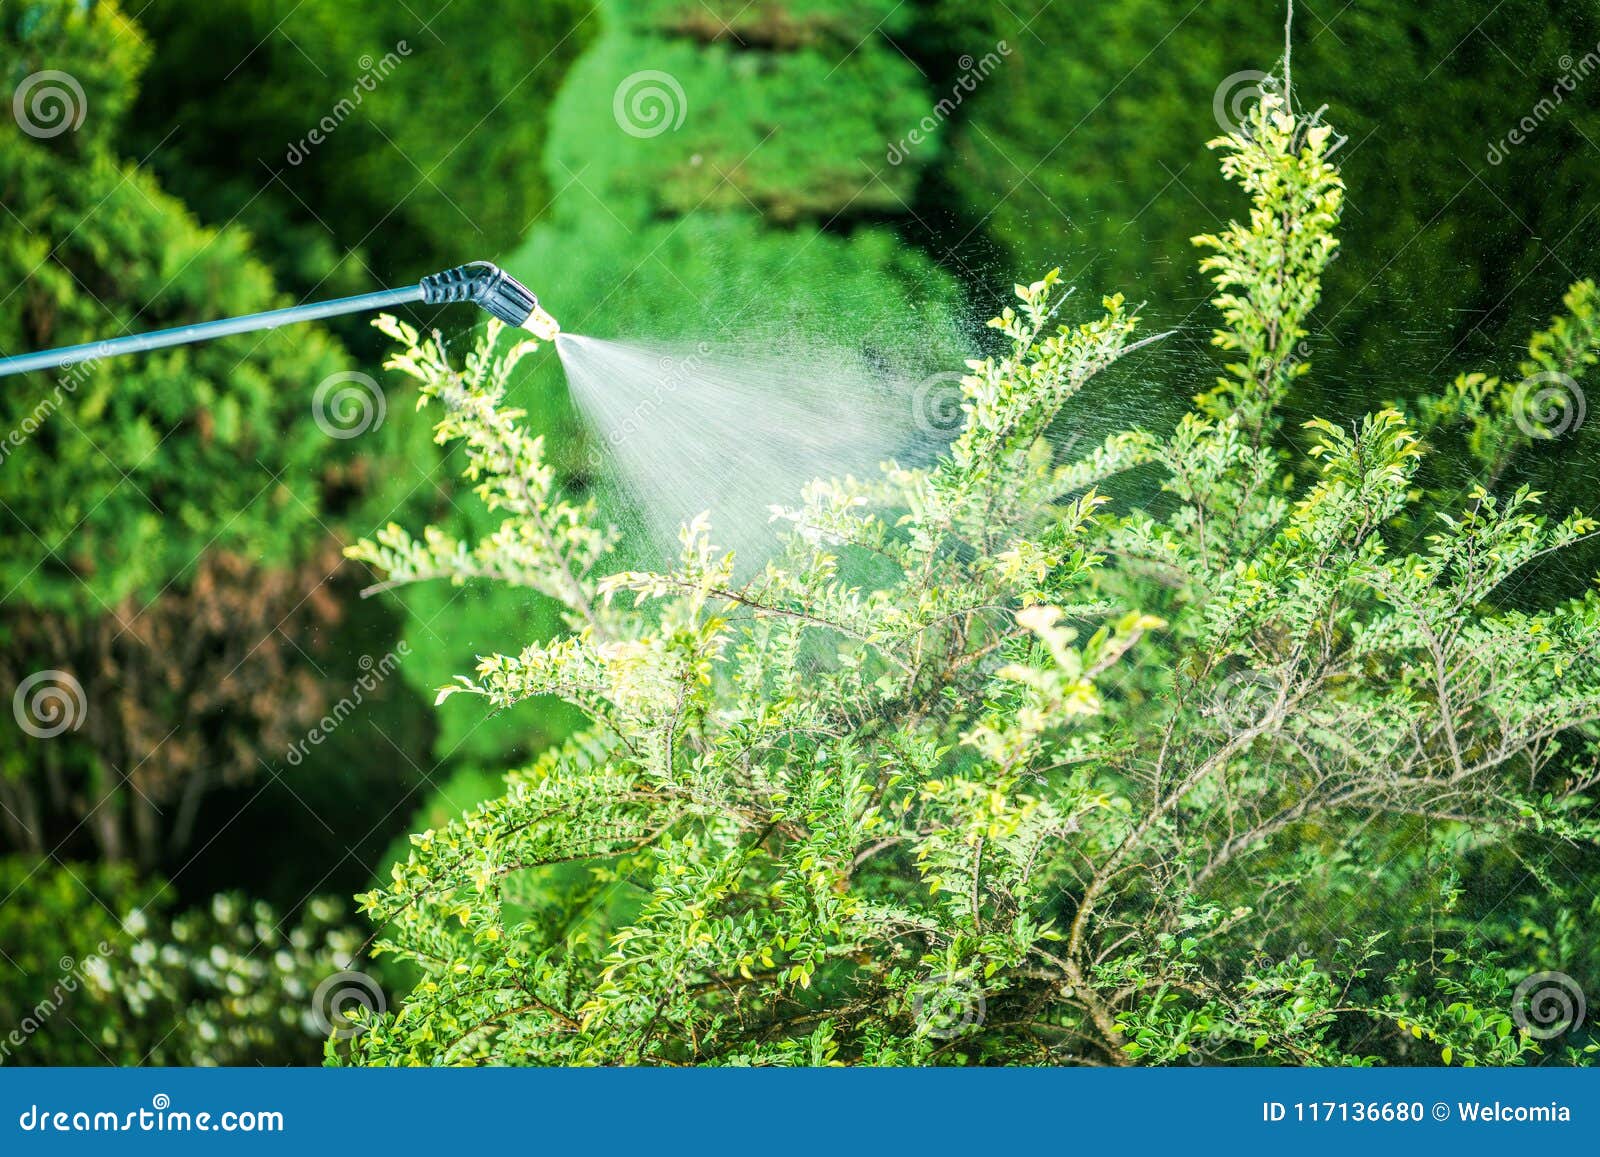 insecticide in the garden